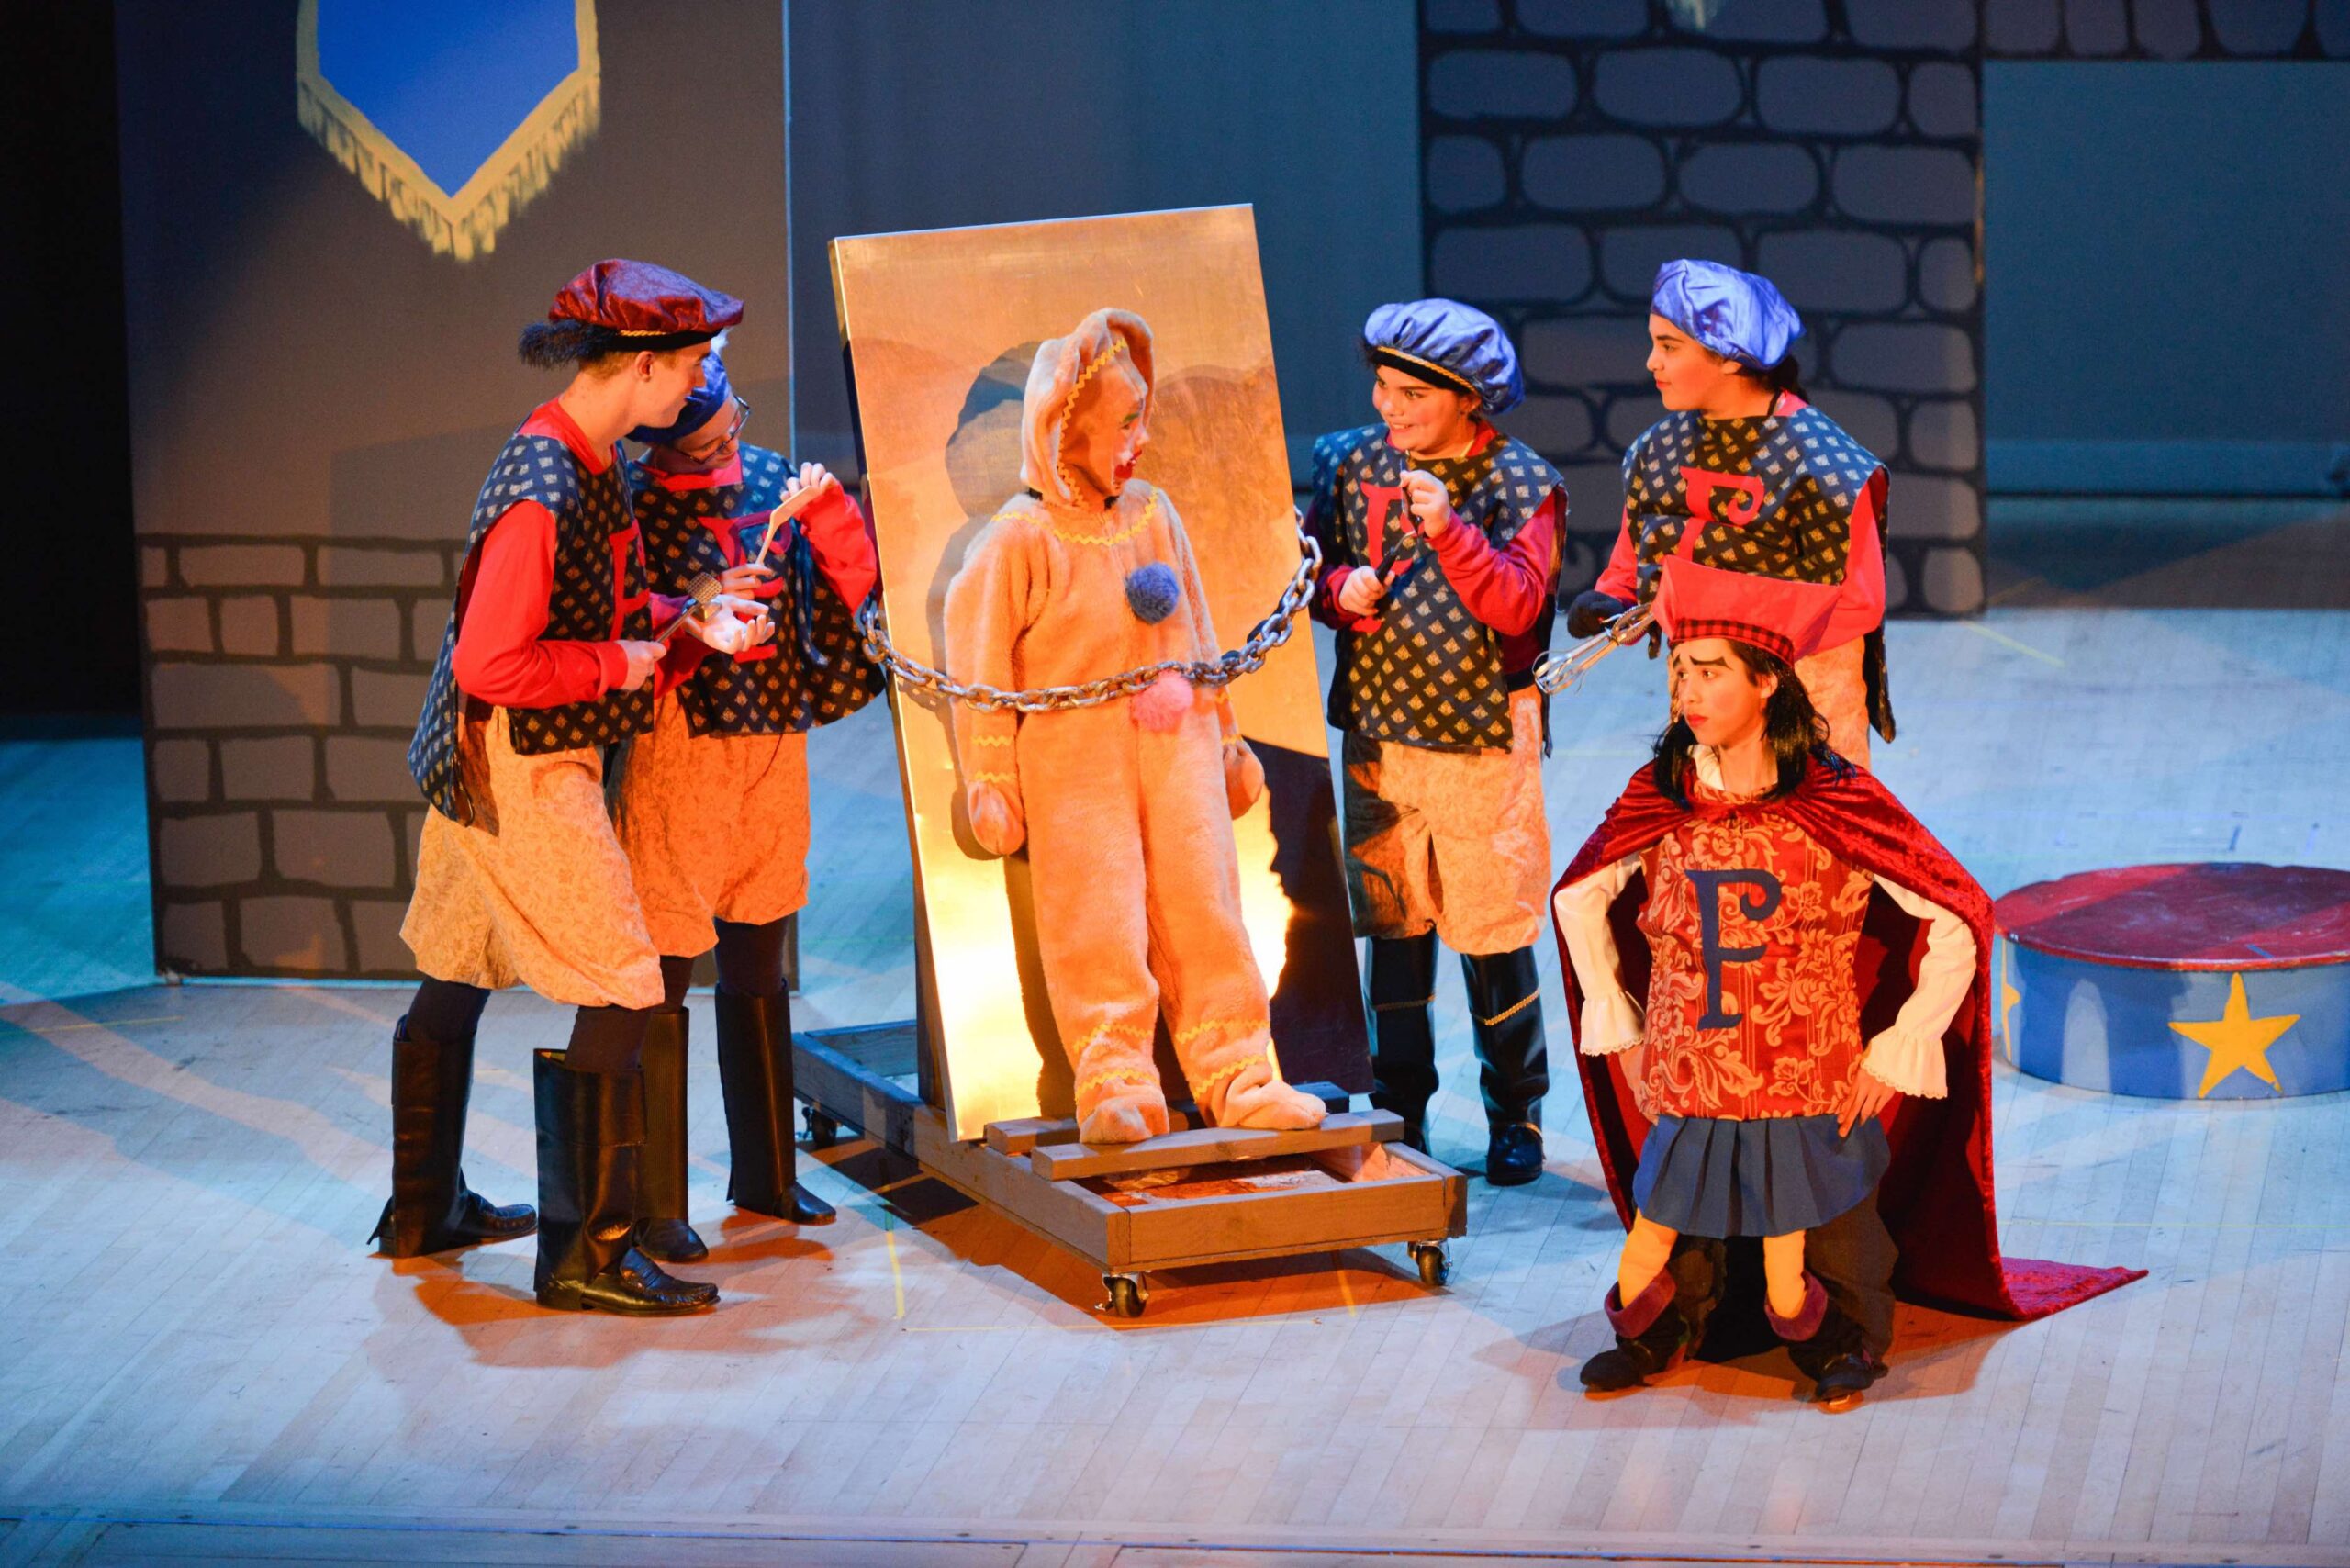 Children in costumes performing a musical at Sol Treasures.